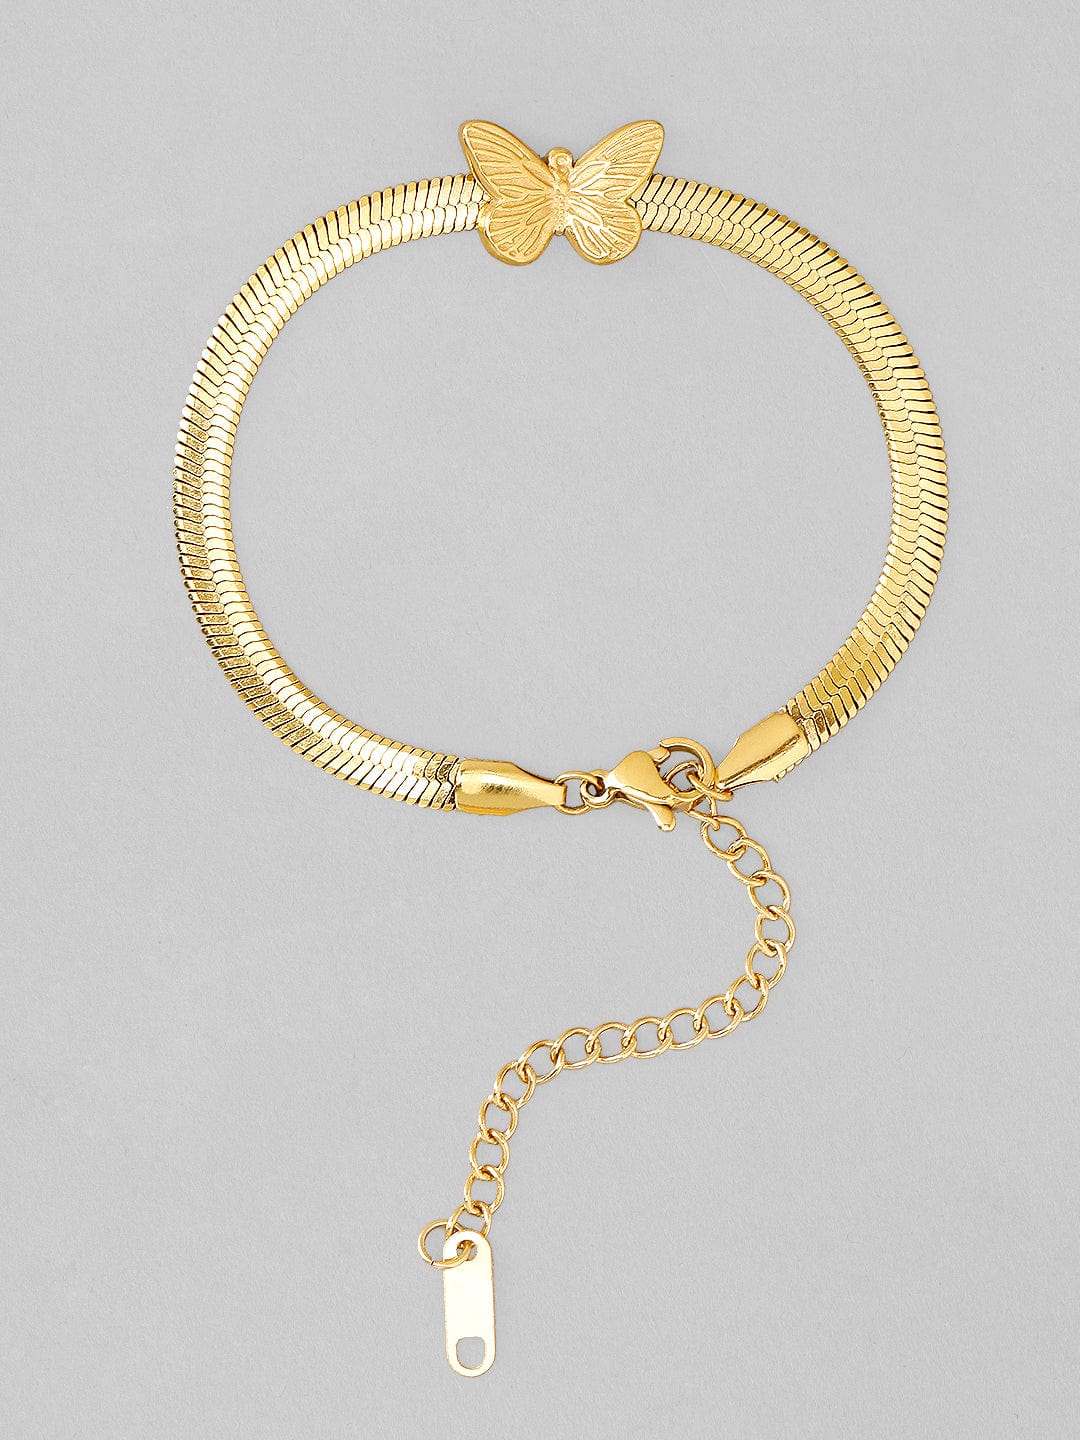 Rubans Voguish 18K Gold Plated Stainless Steel Waterproof Snake Chain Bracelet With Butterfly Charm. Bangles & Bracelets